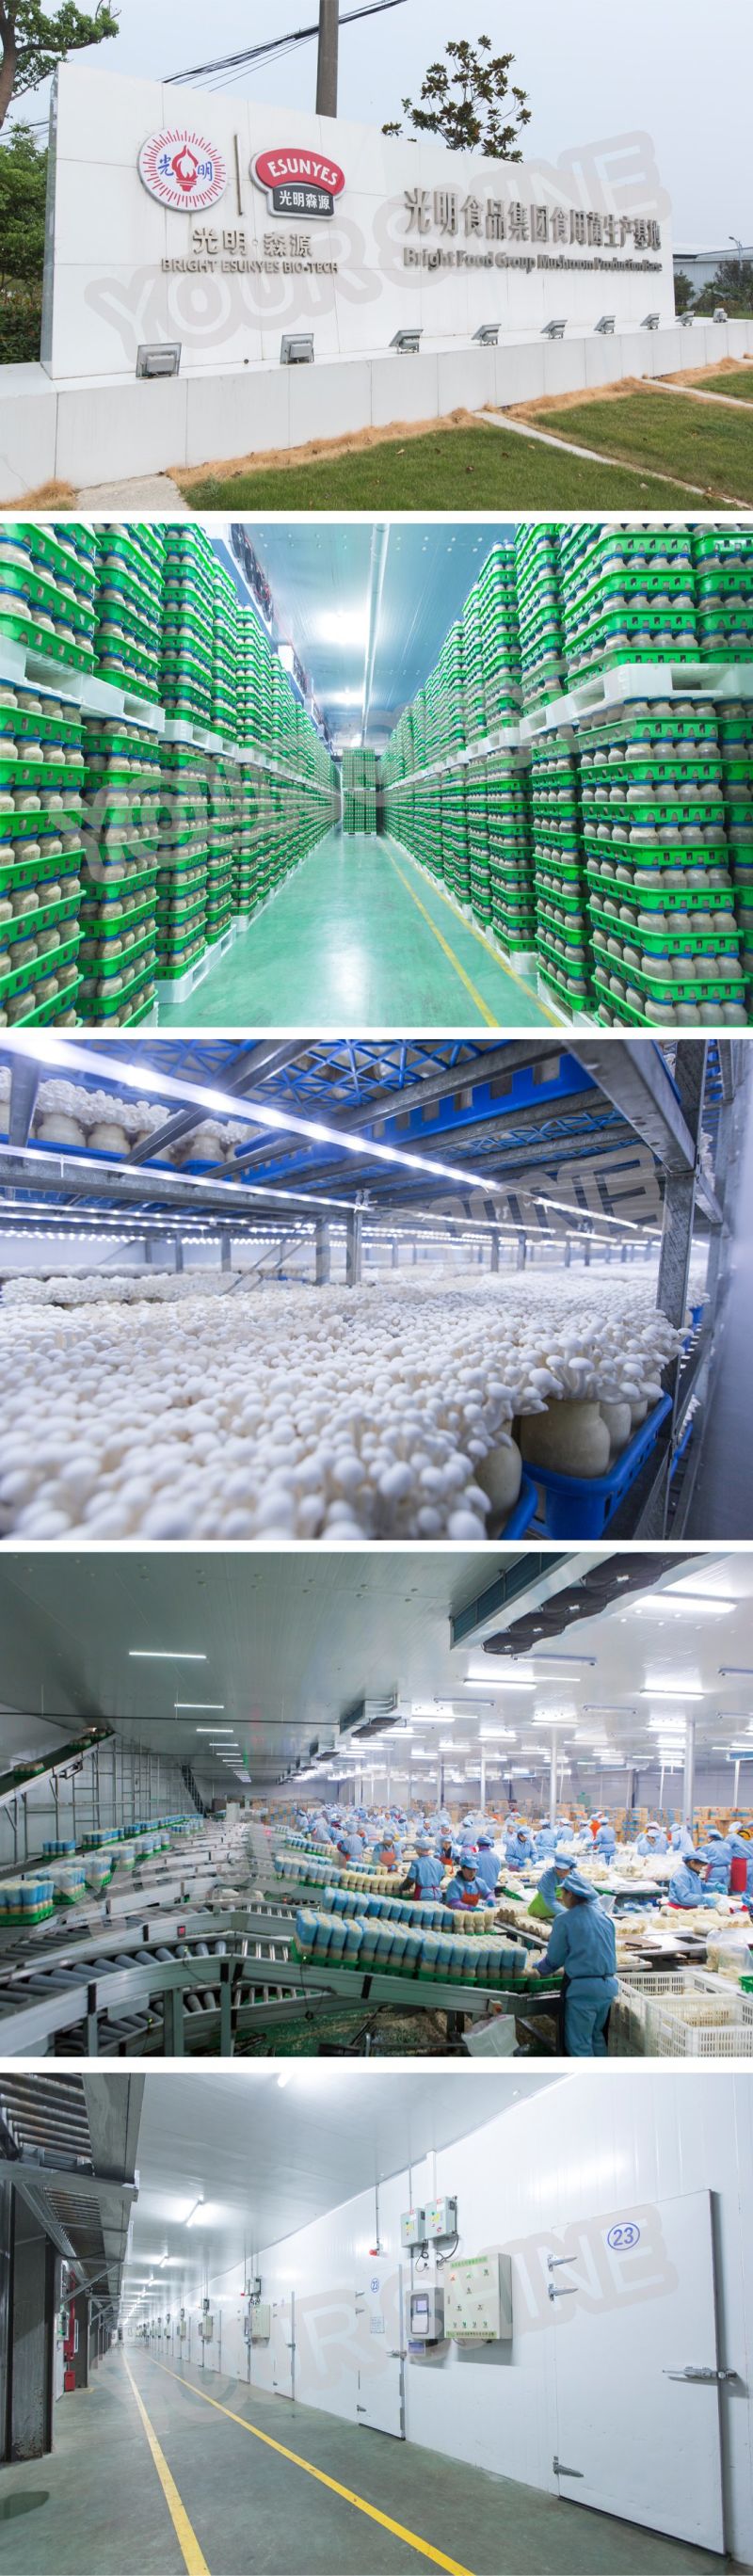 From Polyurethane Foam Sandwich Panels for Cold Storage